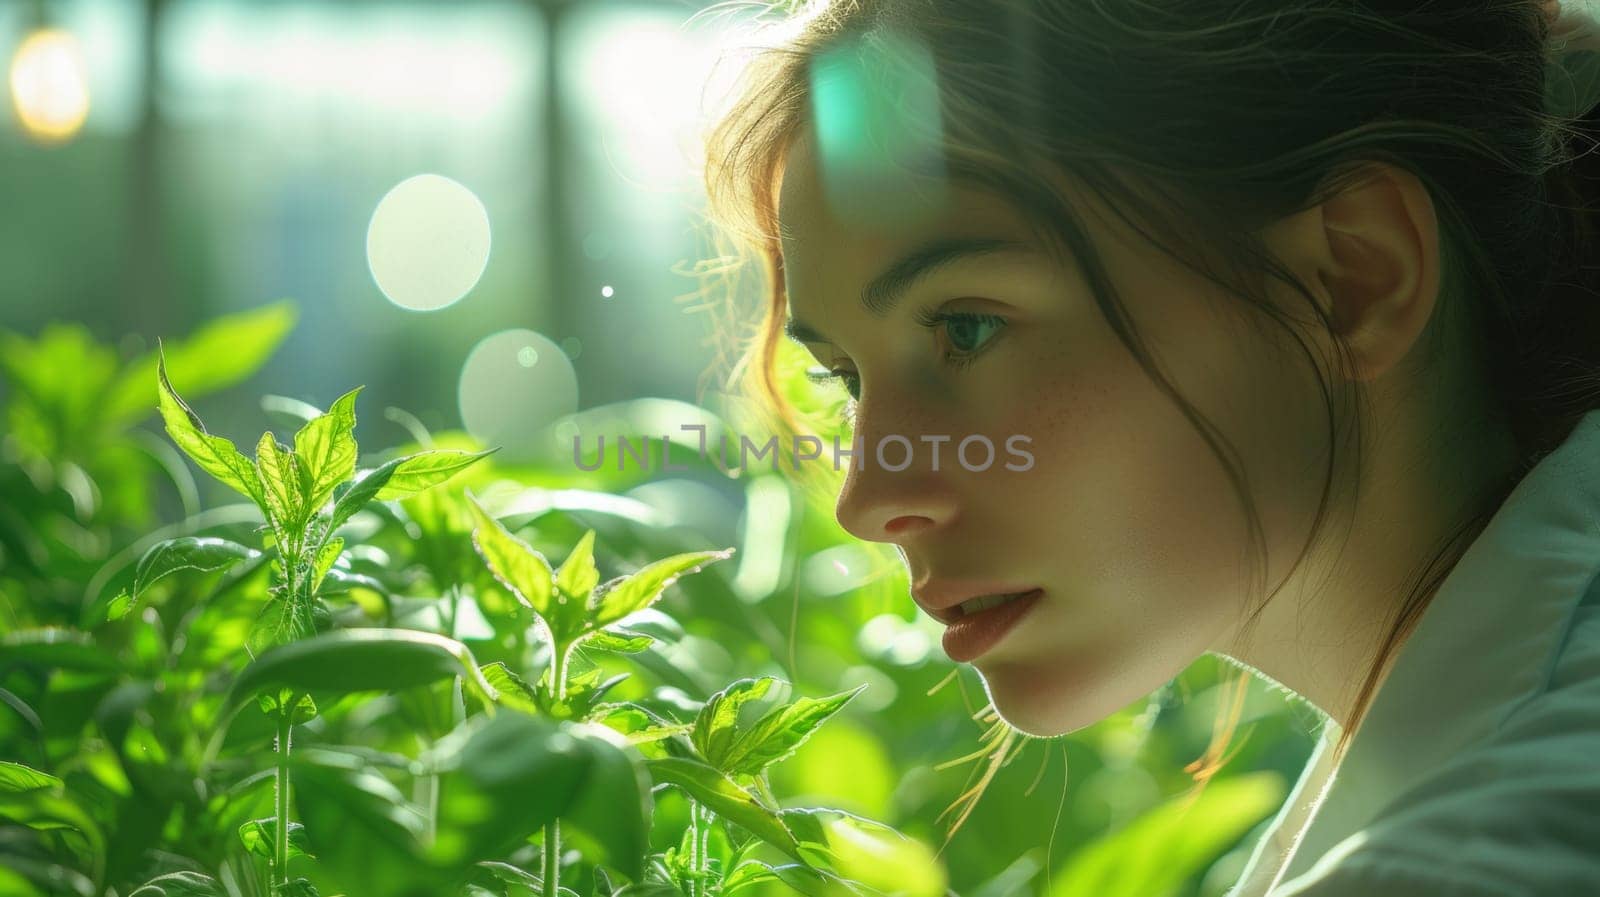 Close up headshot of young girl looking at green leaves. Environmental conservation and care.